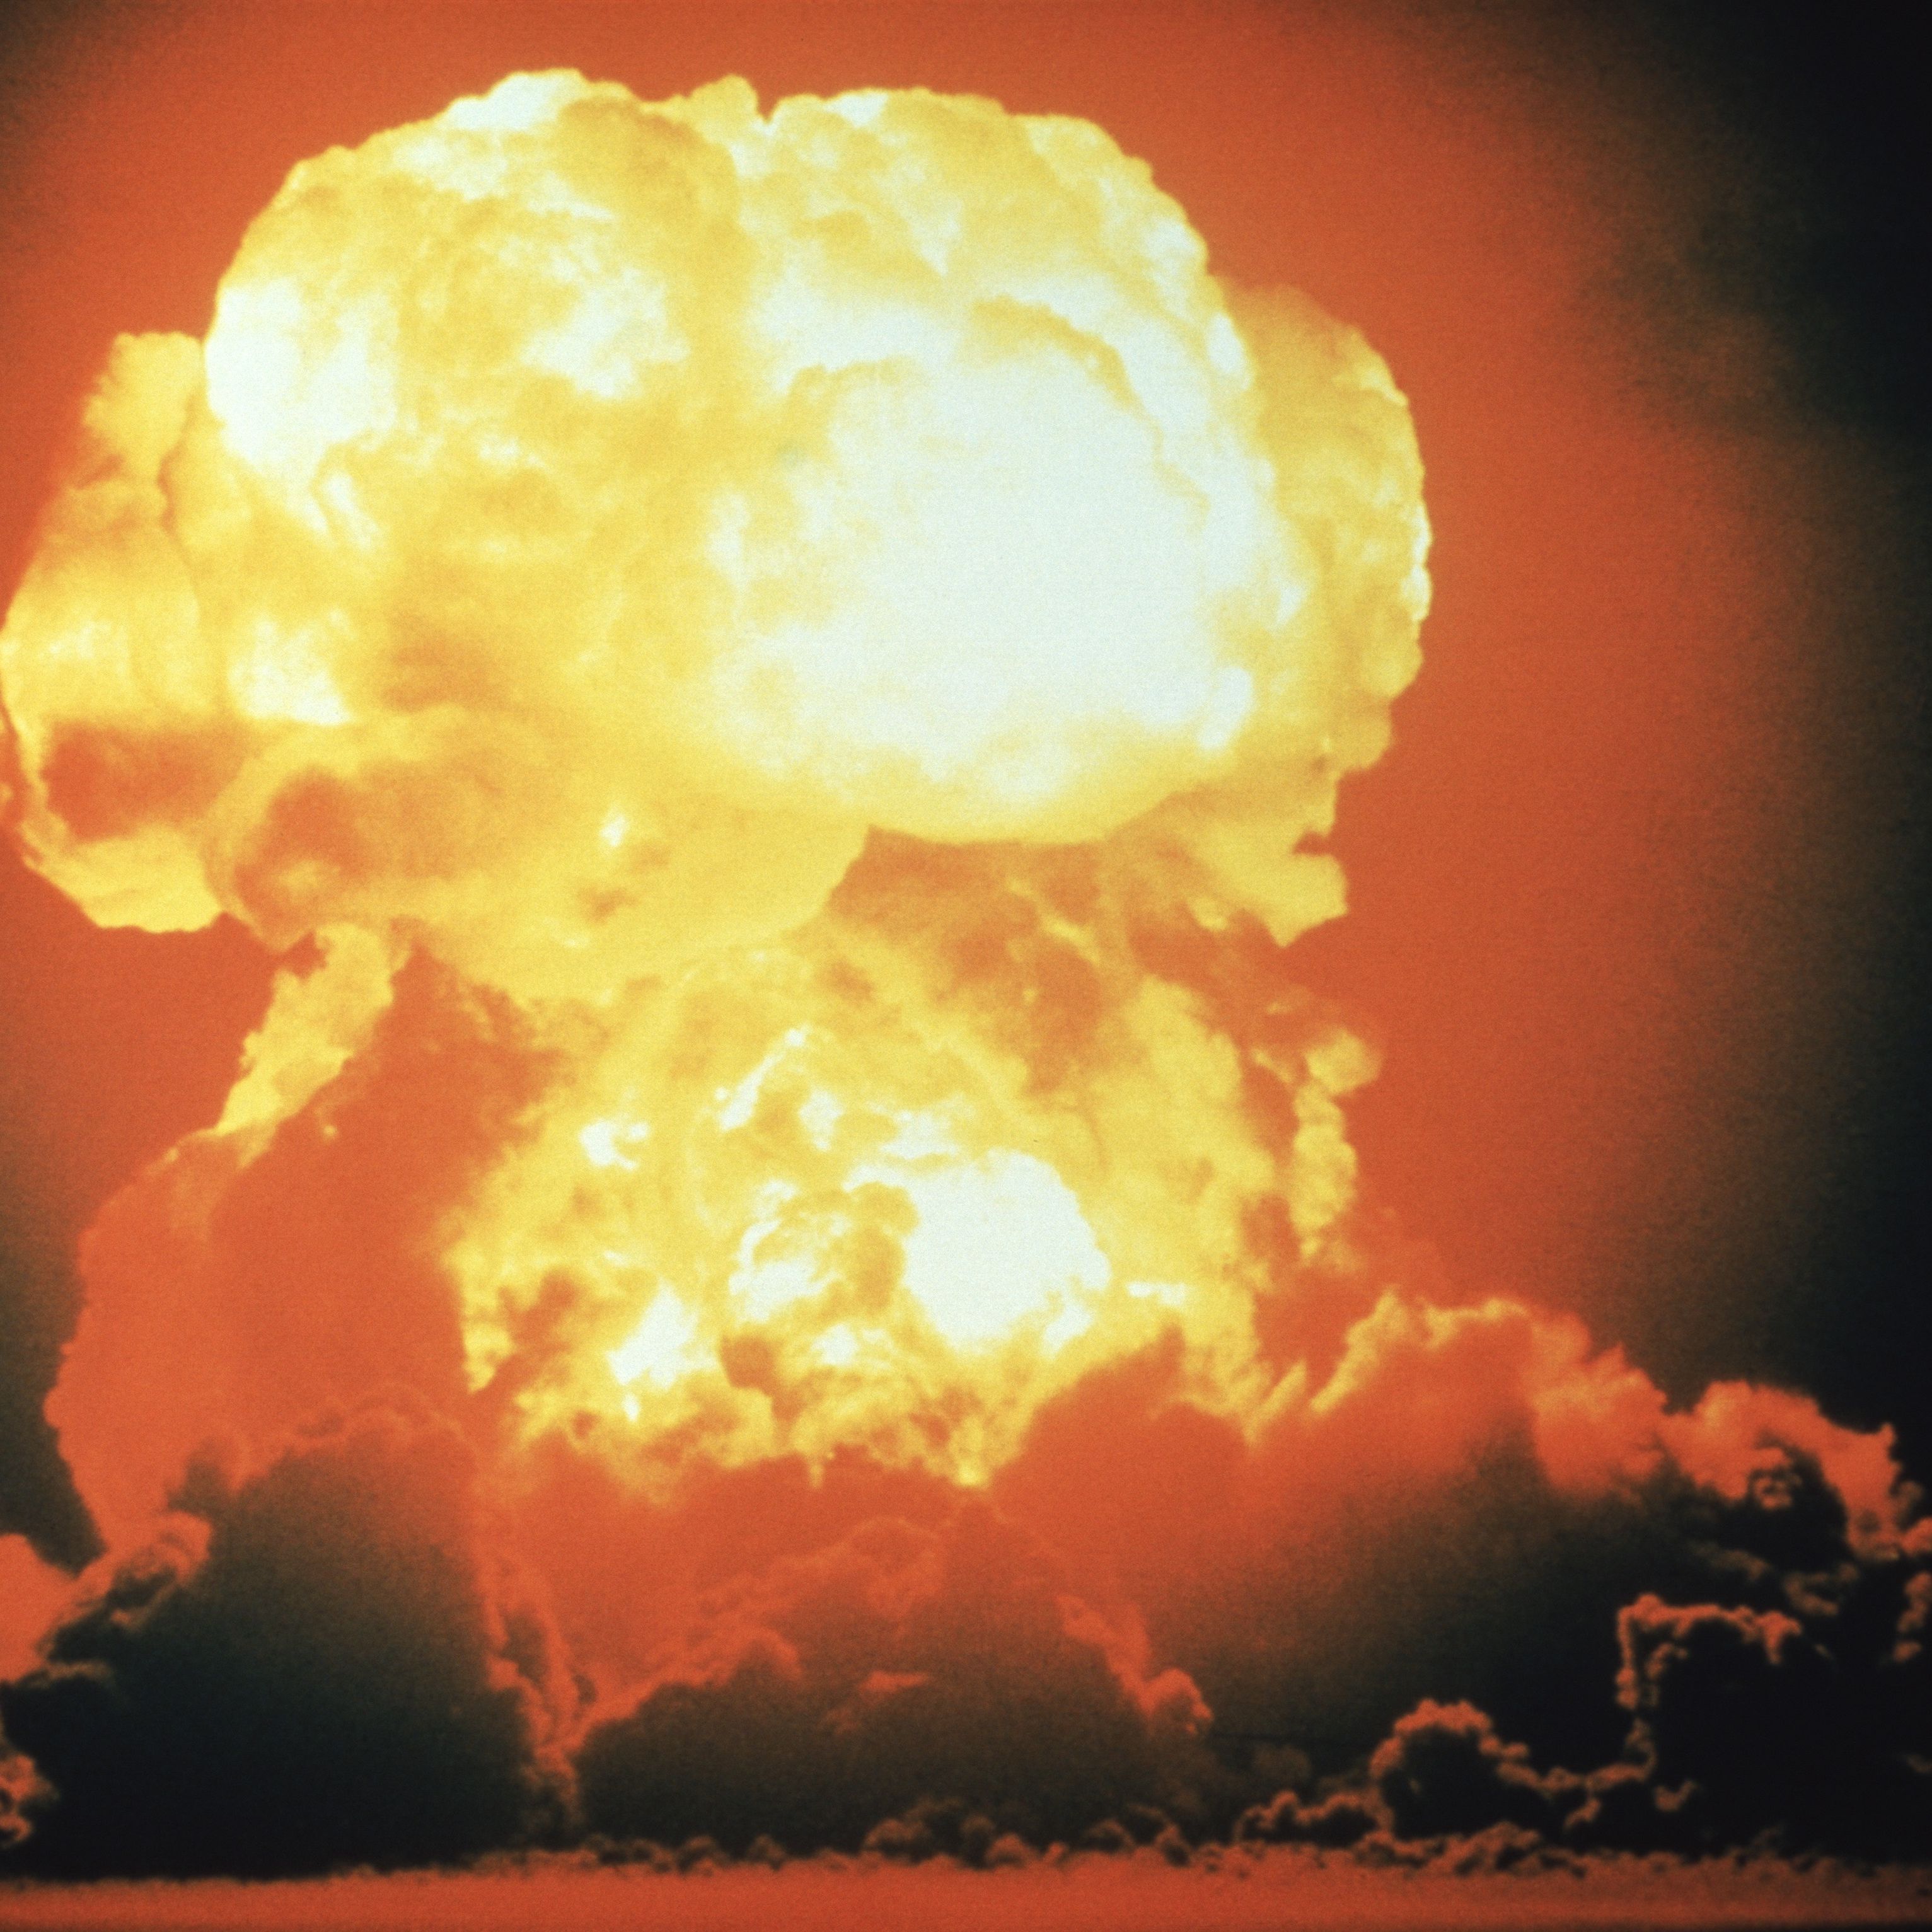 Comparing the Hydrogen Bomb and the Atomic Bomb